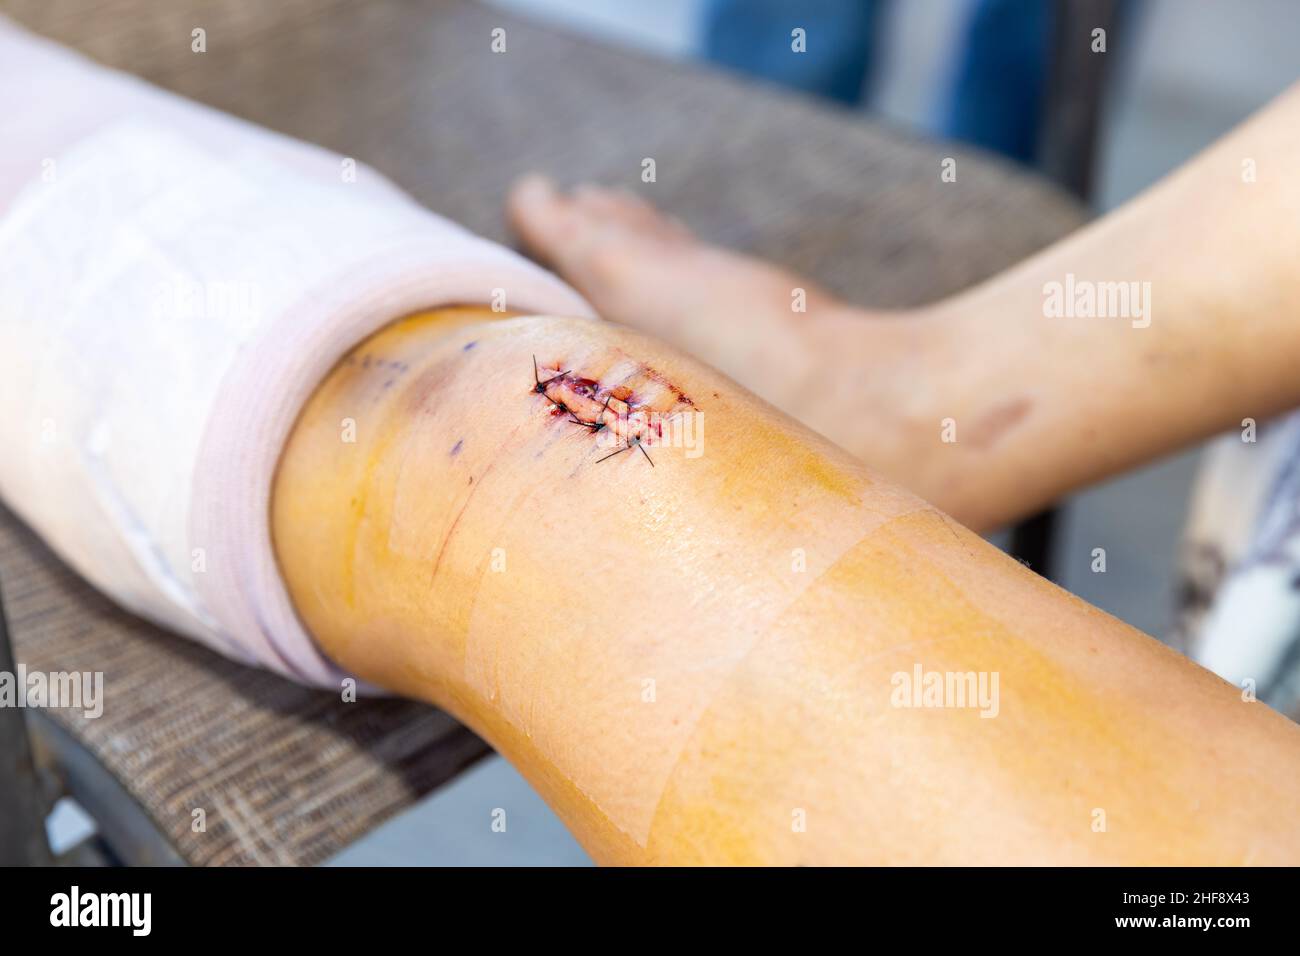 New incision and scar after knee surgery Stock Photo